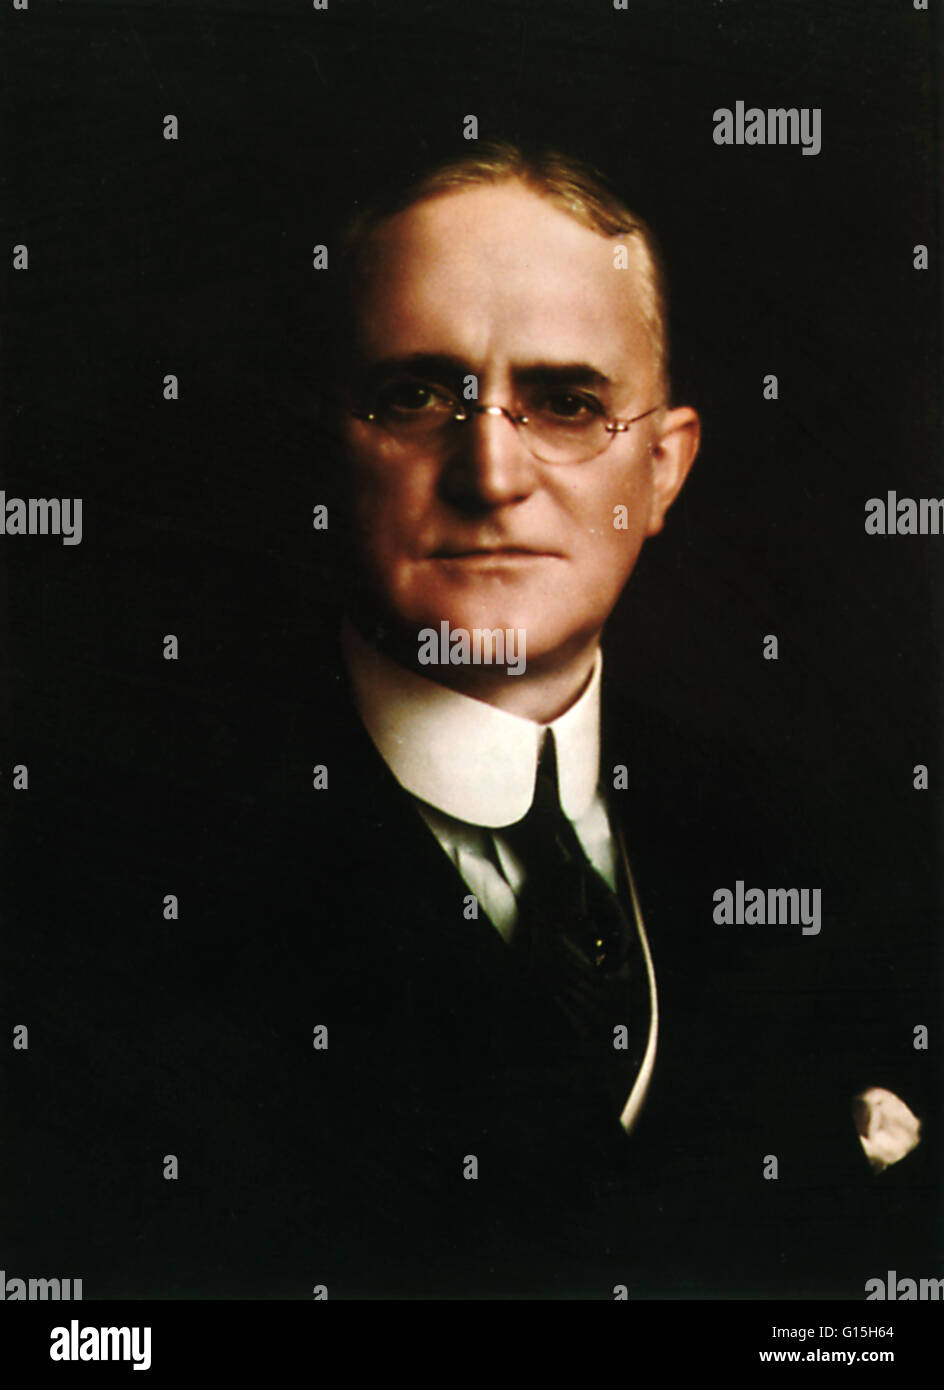 This 1915 color portrait of Eastman was an early attempt at color photography by John George Capstaff, a researcher at Kodak. George Eastman (July 12, 1854 - March 14, 1932) was an American innovator and entrepreneur who founded the Eastman Kodak Company Stock Photo